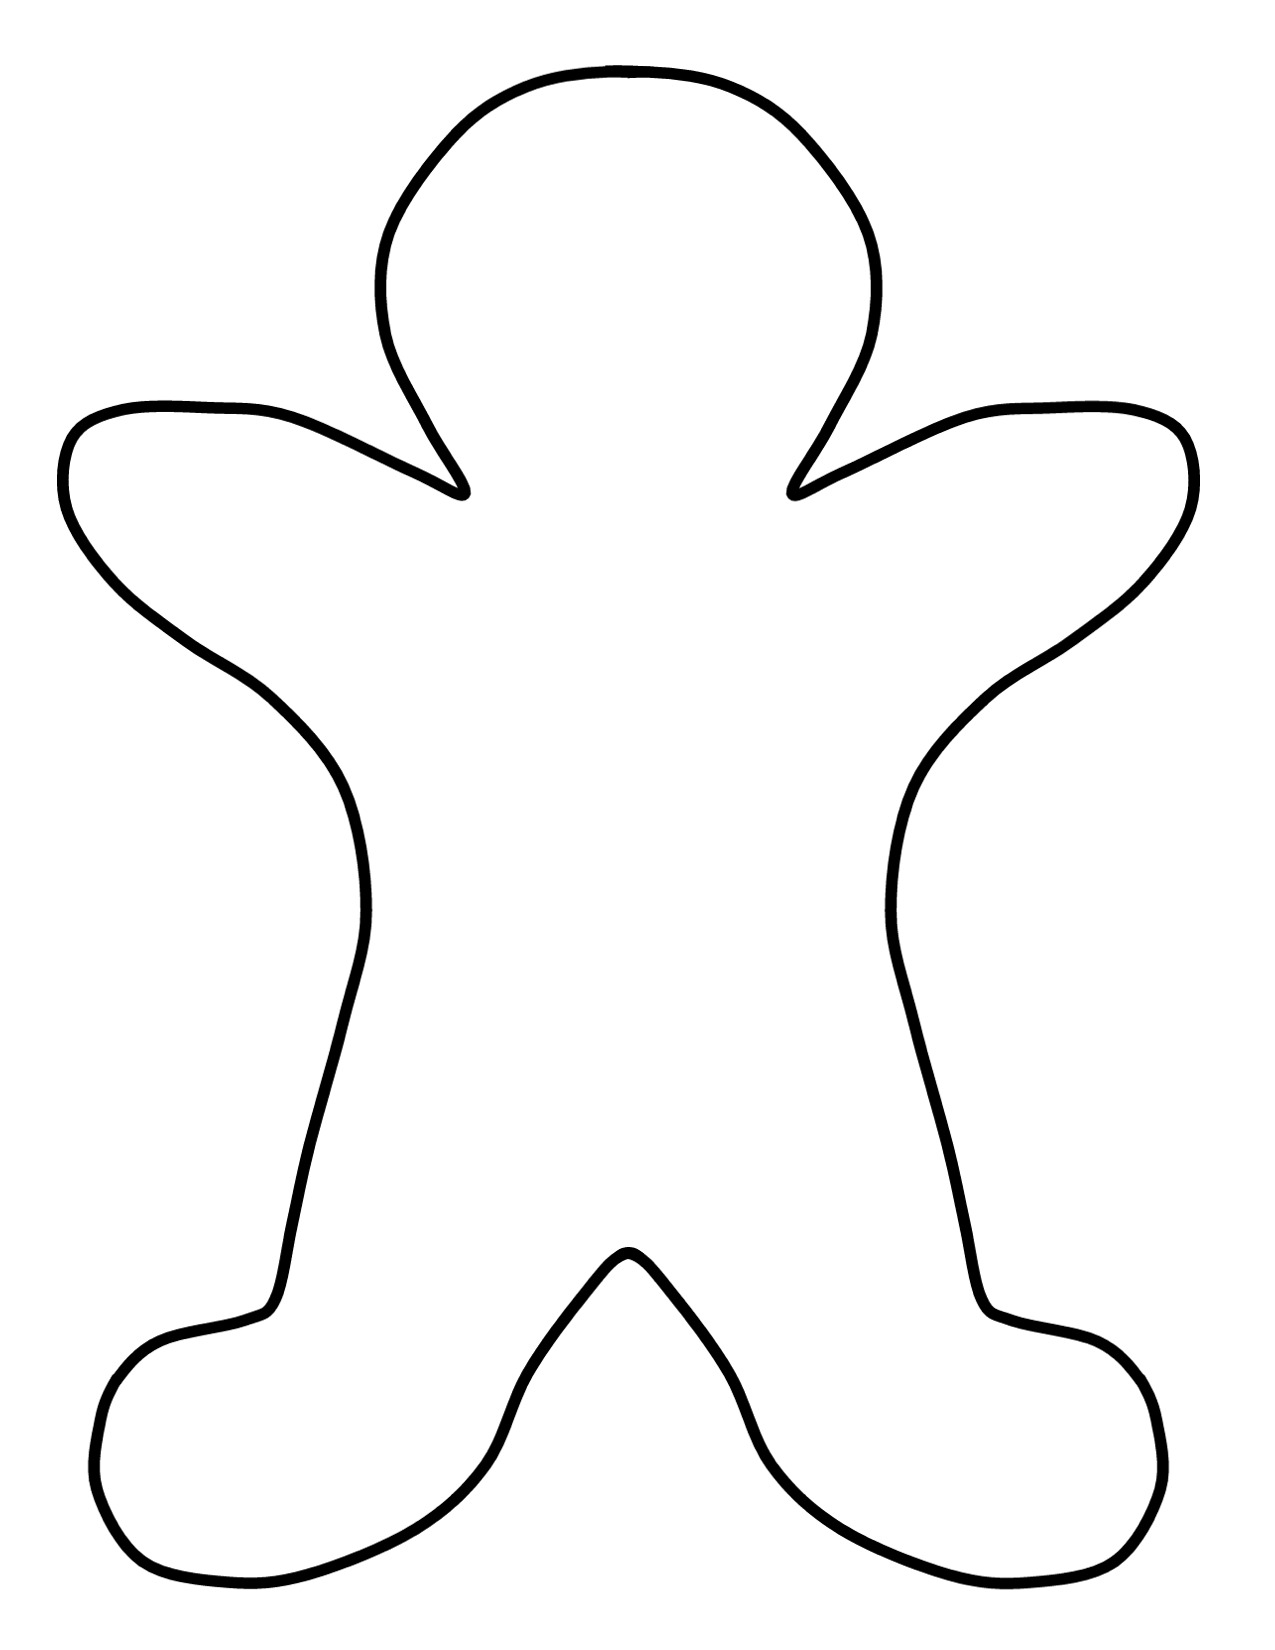 Gingerbread Man Clip Art Free - Free Clipart Images